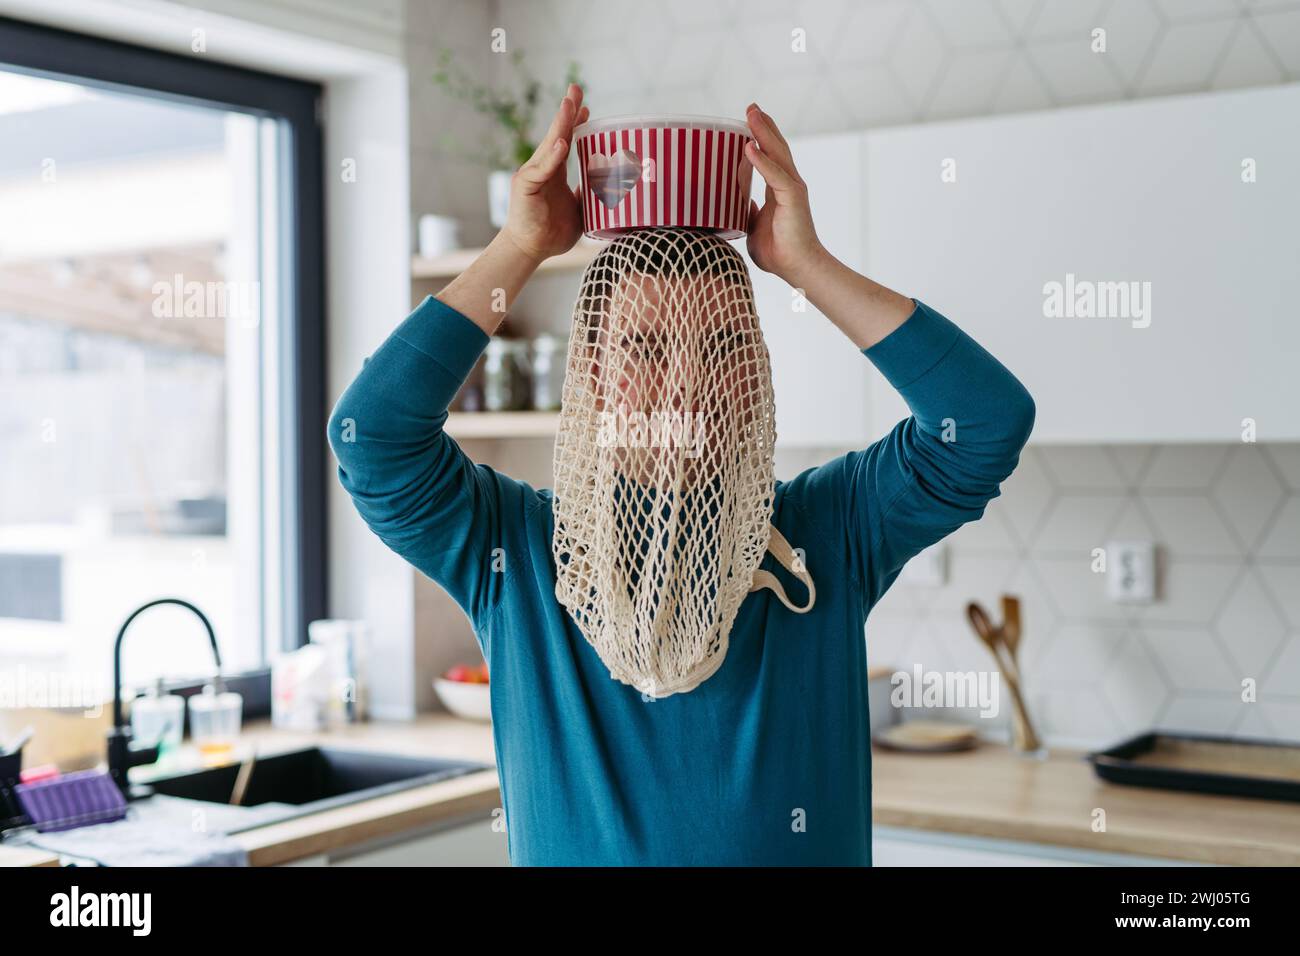 Portrait of young man with Down syndrome being funny, have mash net bag on head, holding popcorn bucket. Stock Photo